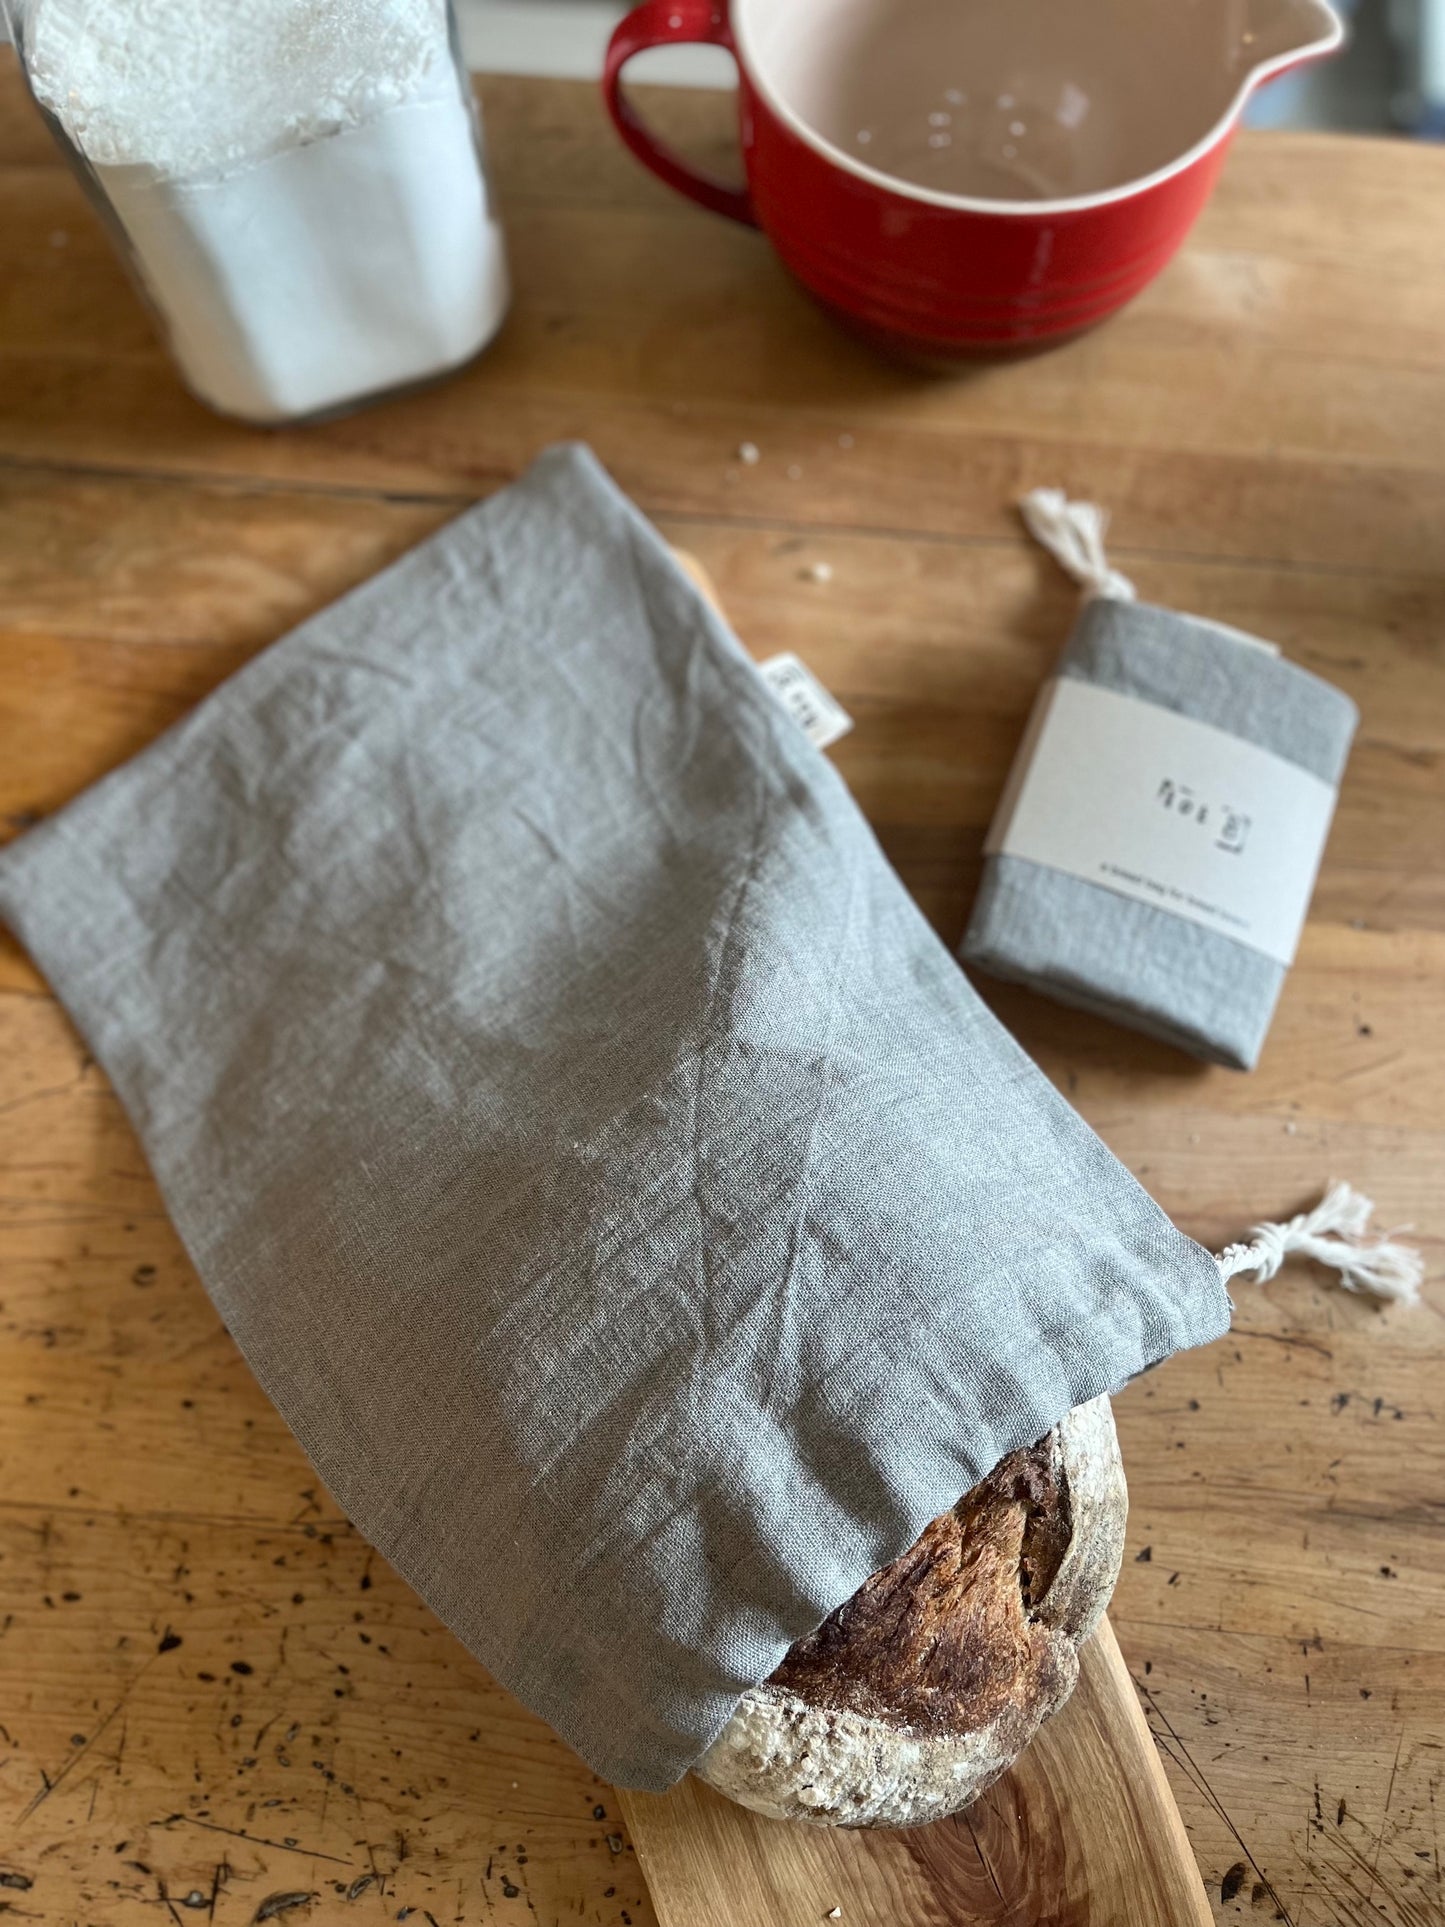 Bread bag with bread peaking out. Packaged bread bag beside it.